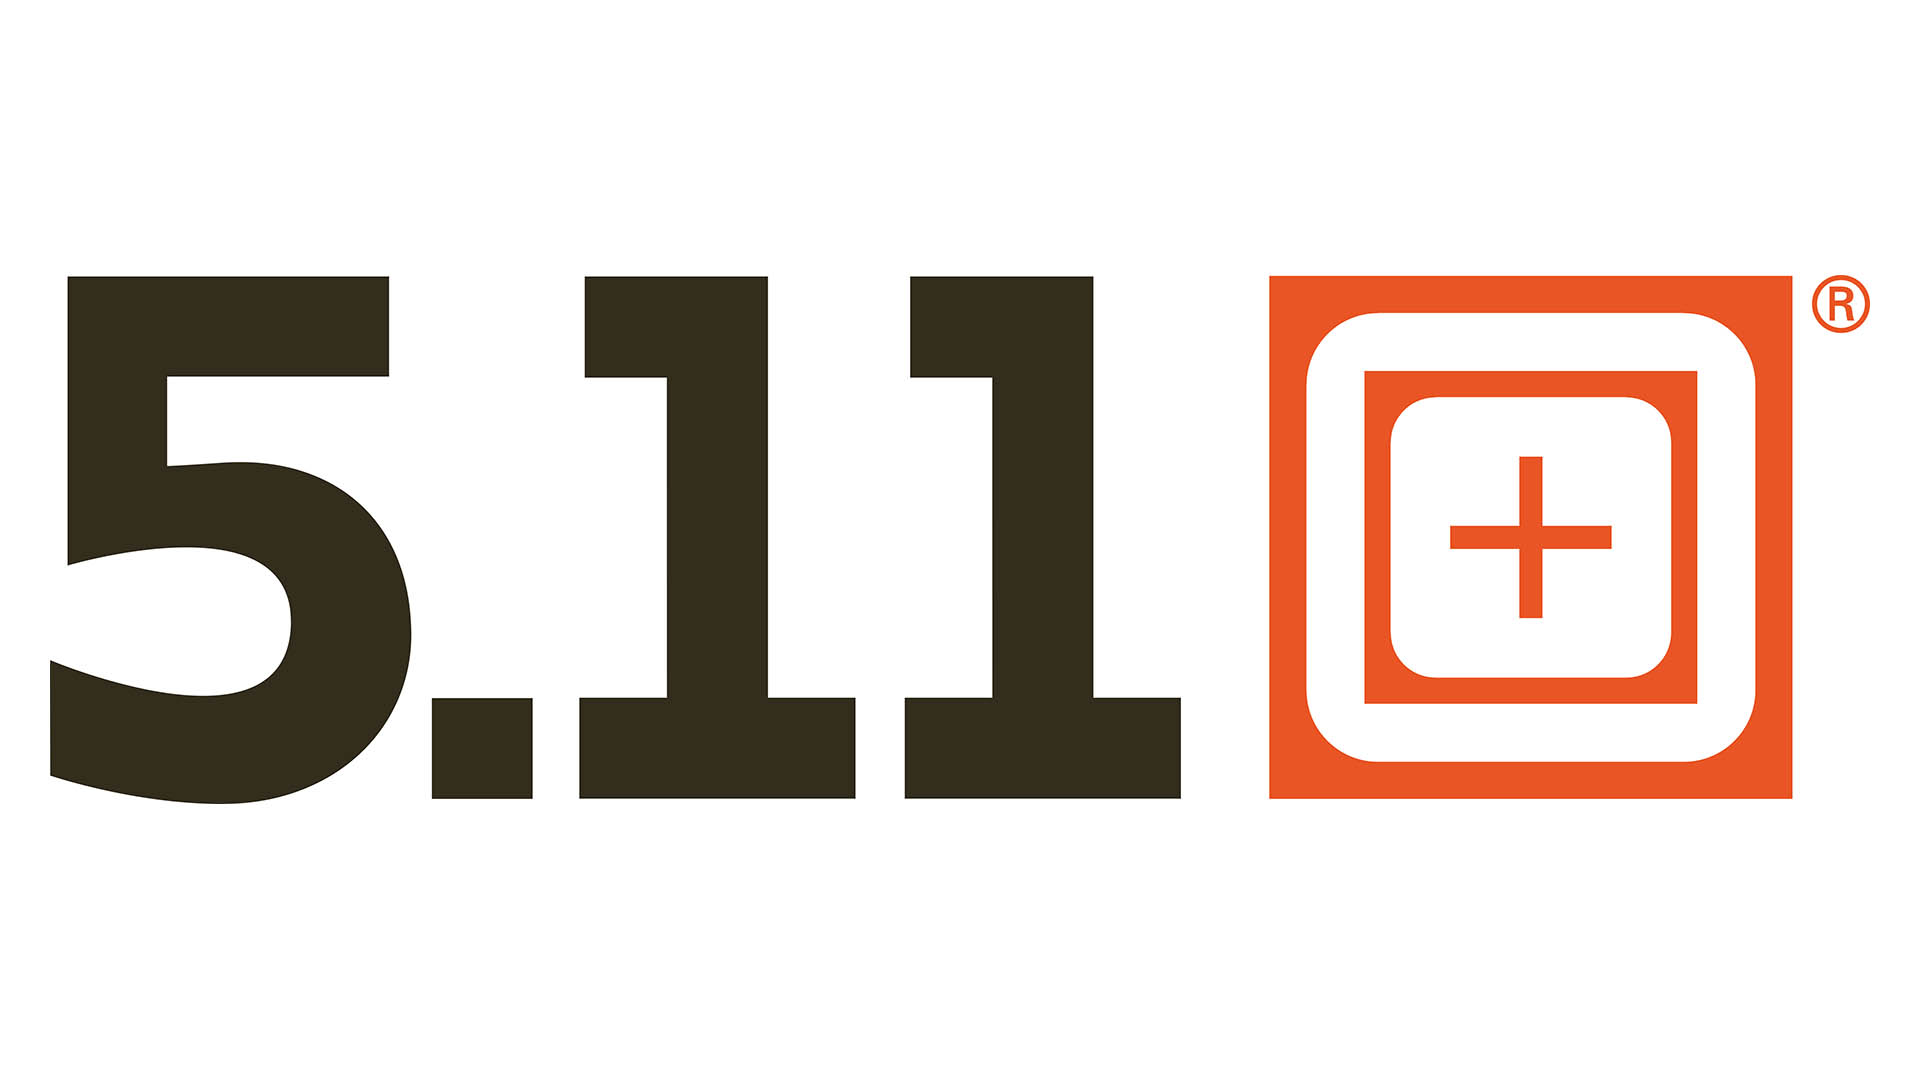 5.11 Tactical Celebrates 20 Years of Relentless Innovation with Annual 5.11  Days EventThe Firearm Blog